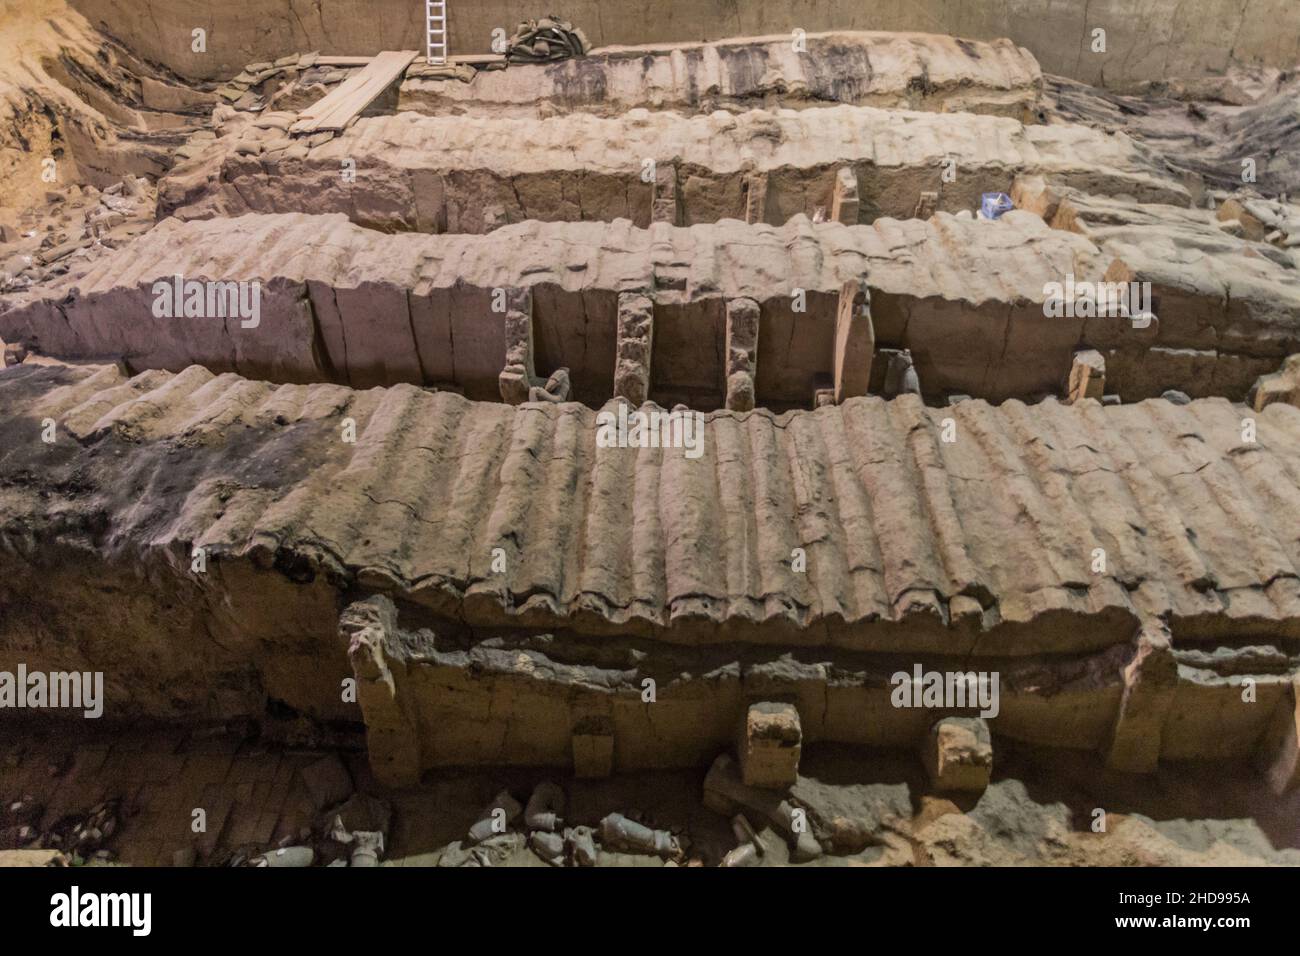 View of the Pit 2 of the Army of Terracotta Warriors near Xi'an, Shaanxi province, China Stock Photo